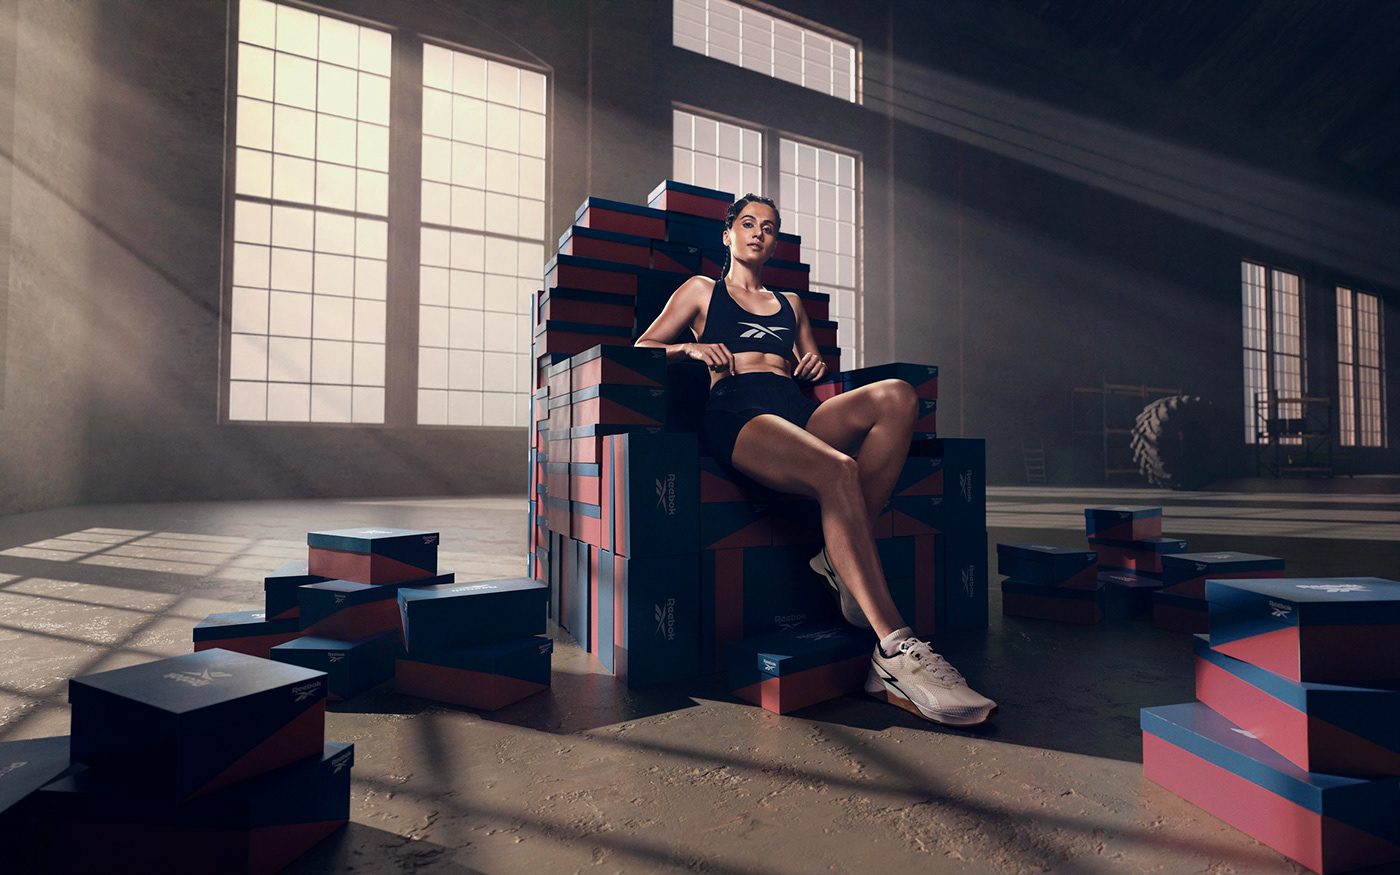 Athlete sitting atop a throne of shoe boxes in a gym, promoting Reebok footwear.